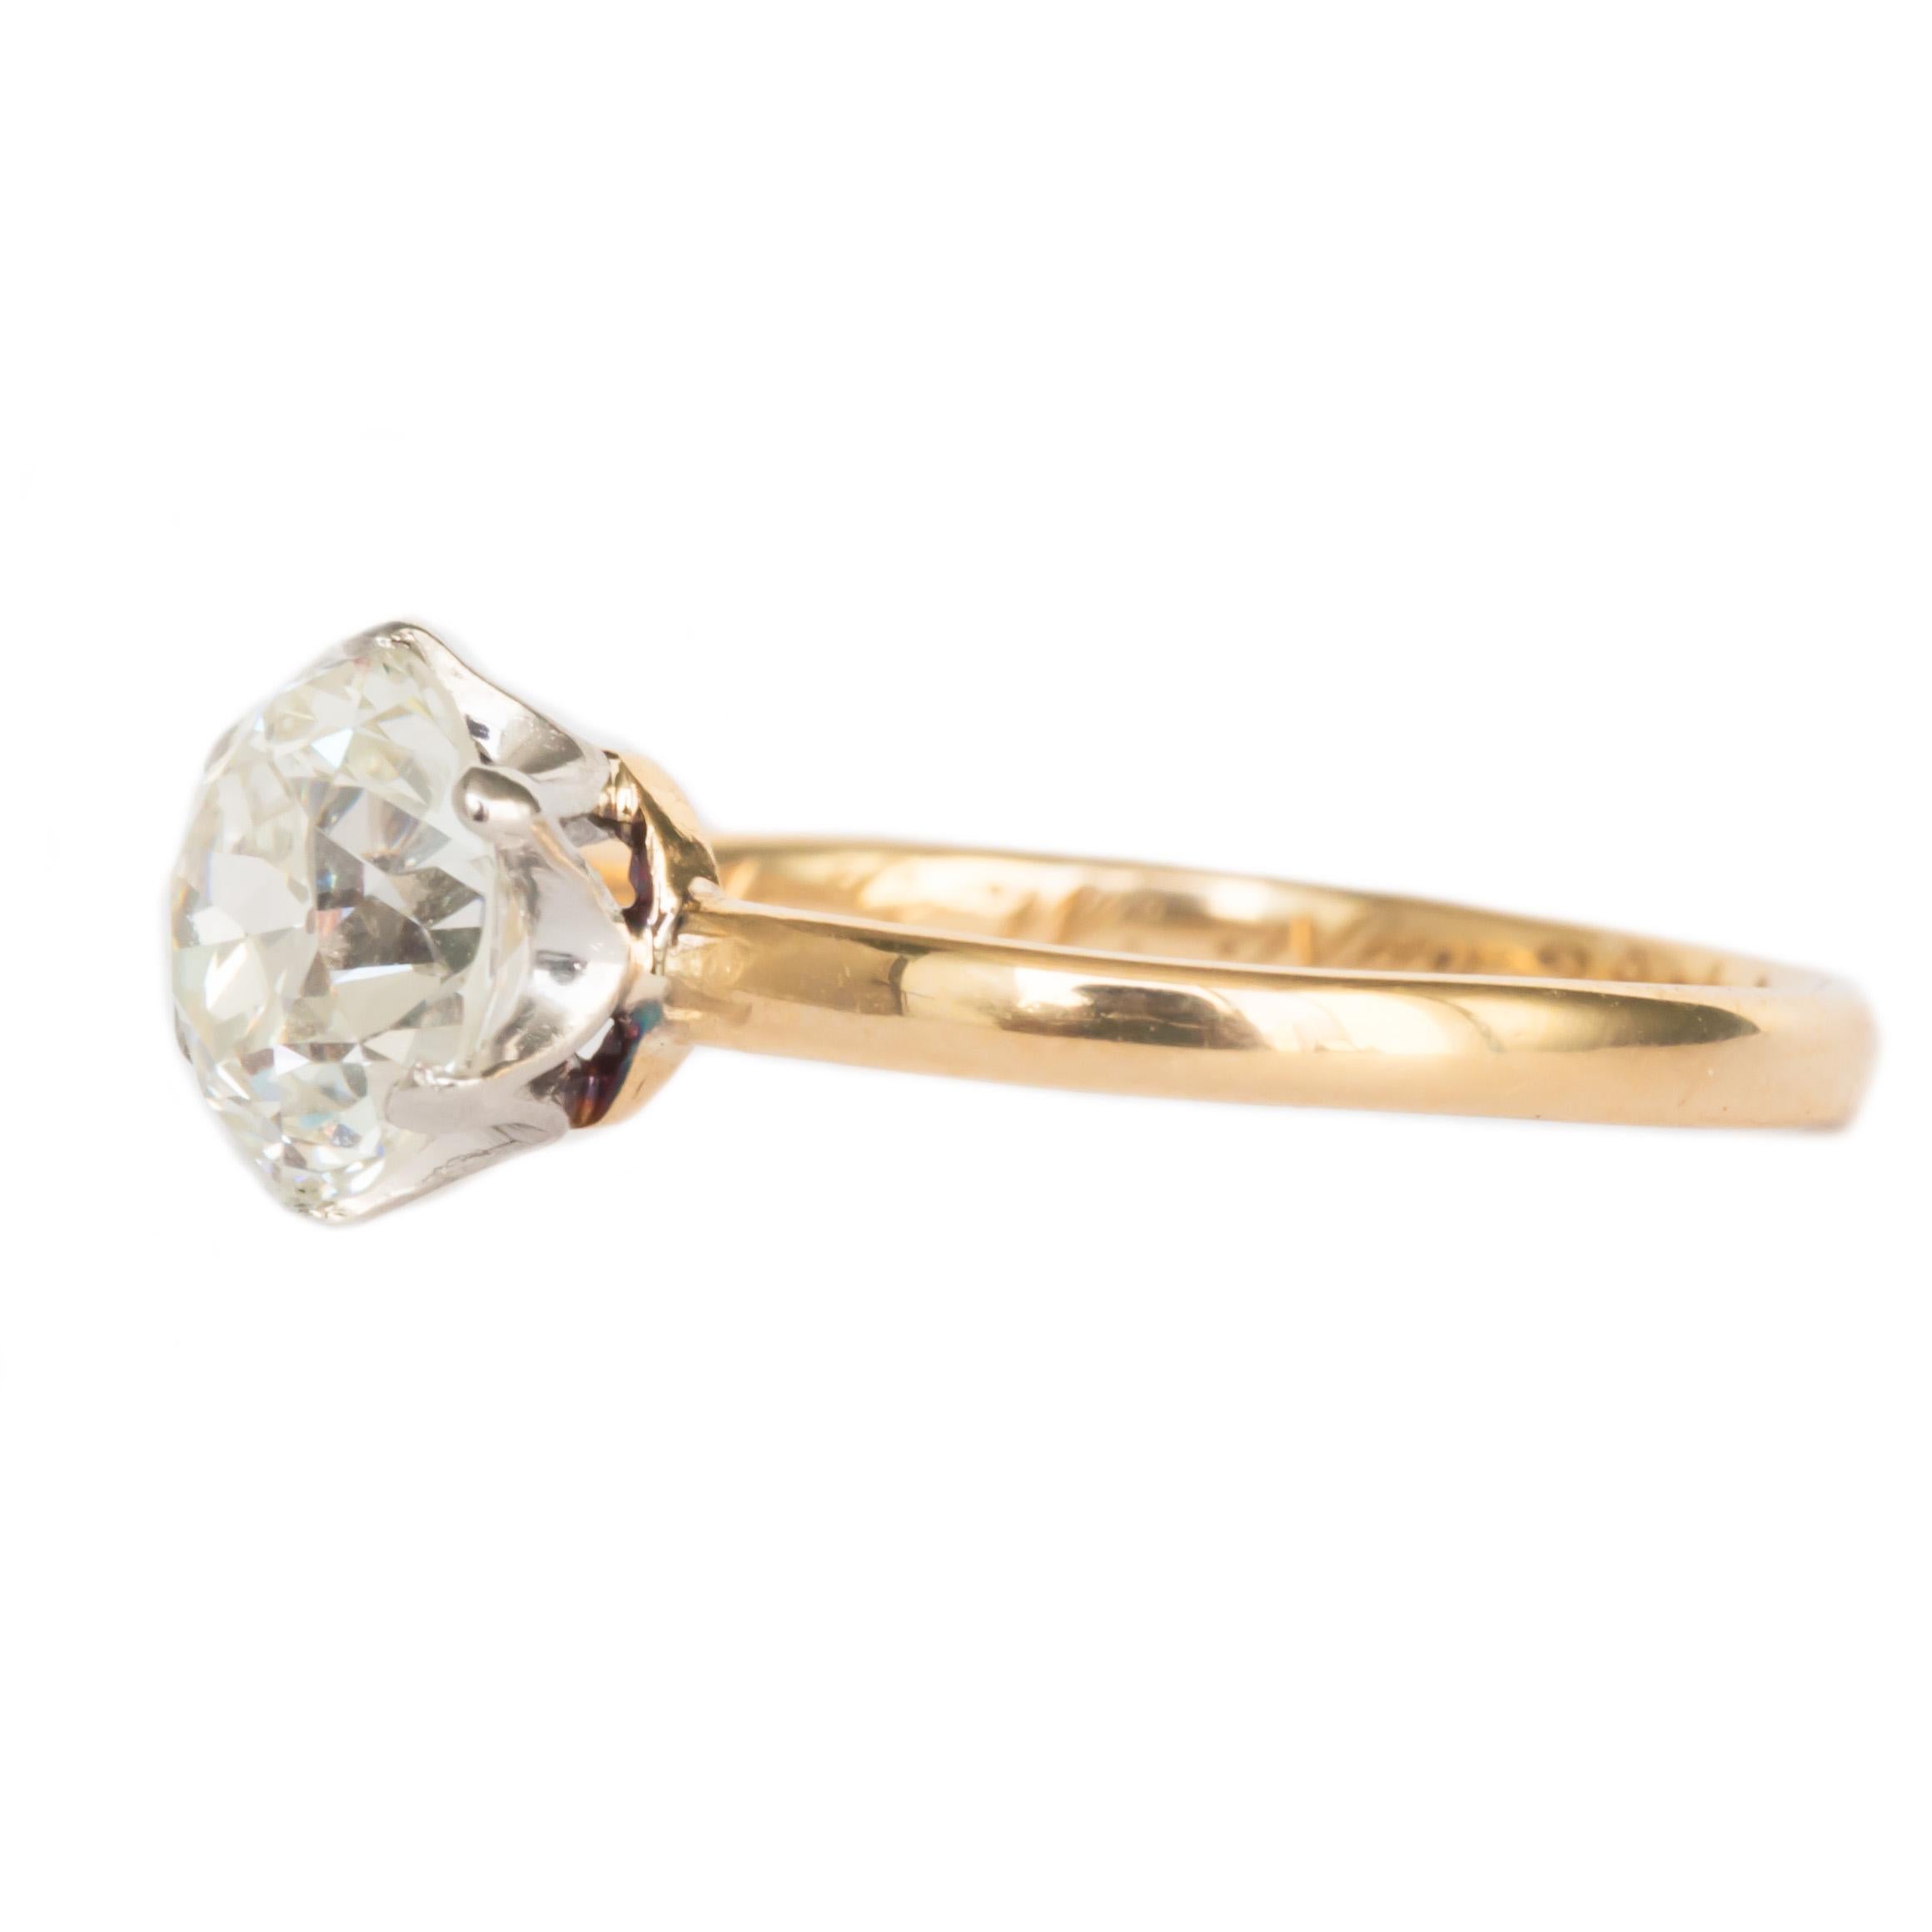 *Designer: Tiffany and Co.*
Ring Size: 6
Metal Type: 18 karat Yellow Gold Platinum and Gold
Weight: 2.2 grams

Center Diamond Details
Shape: Old European Brilliant 
Carat Weight: 1.40 carat
Color: I
Clarity: VS1

Finger to Top of Stone Measurement: